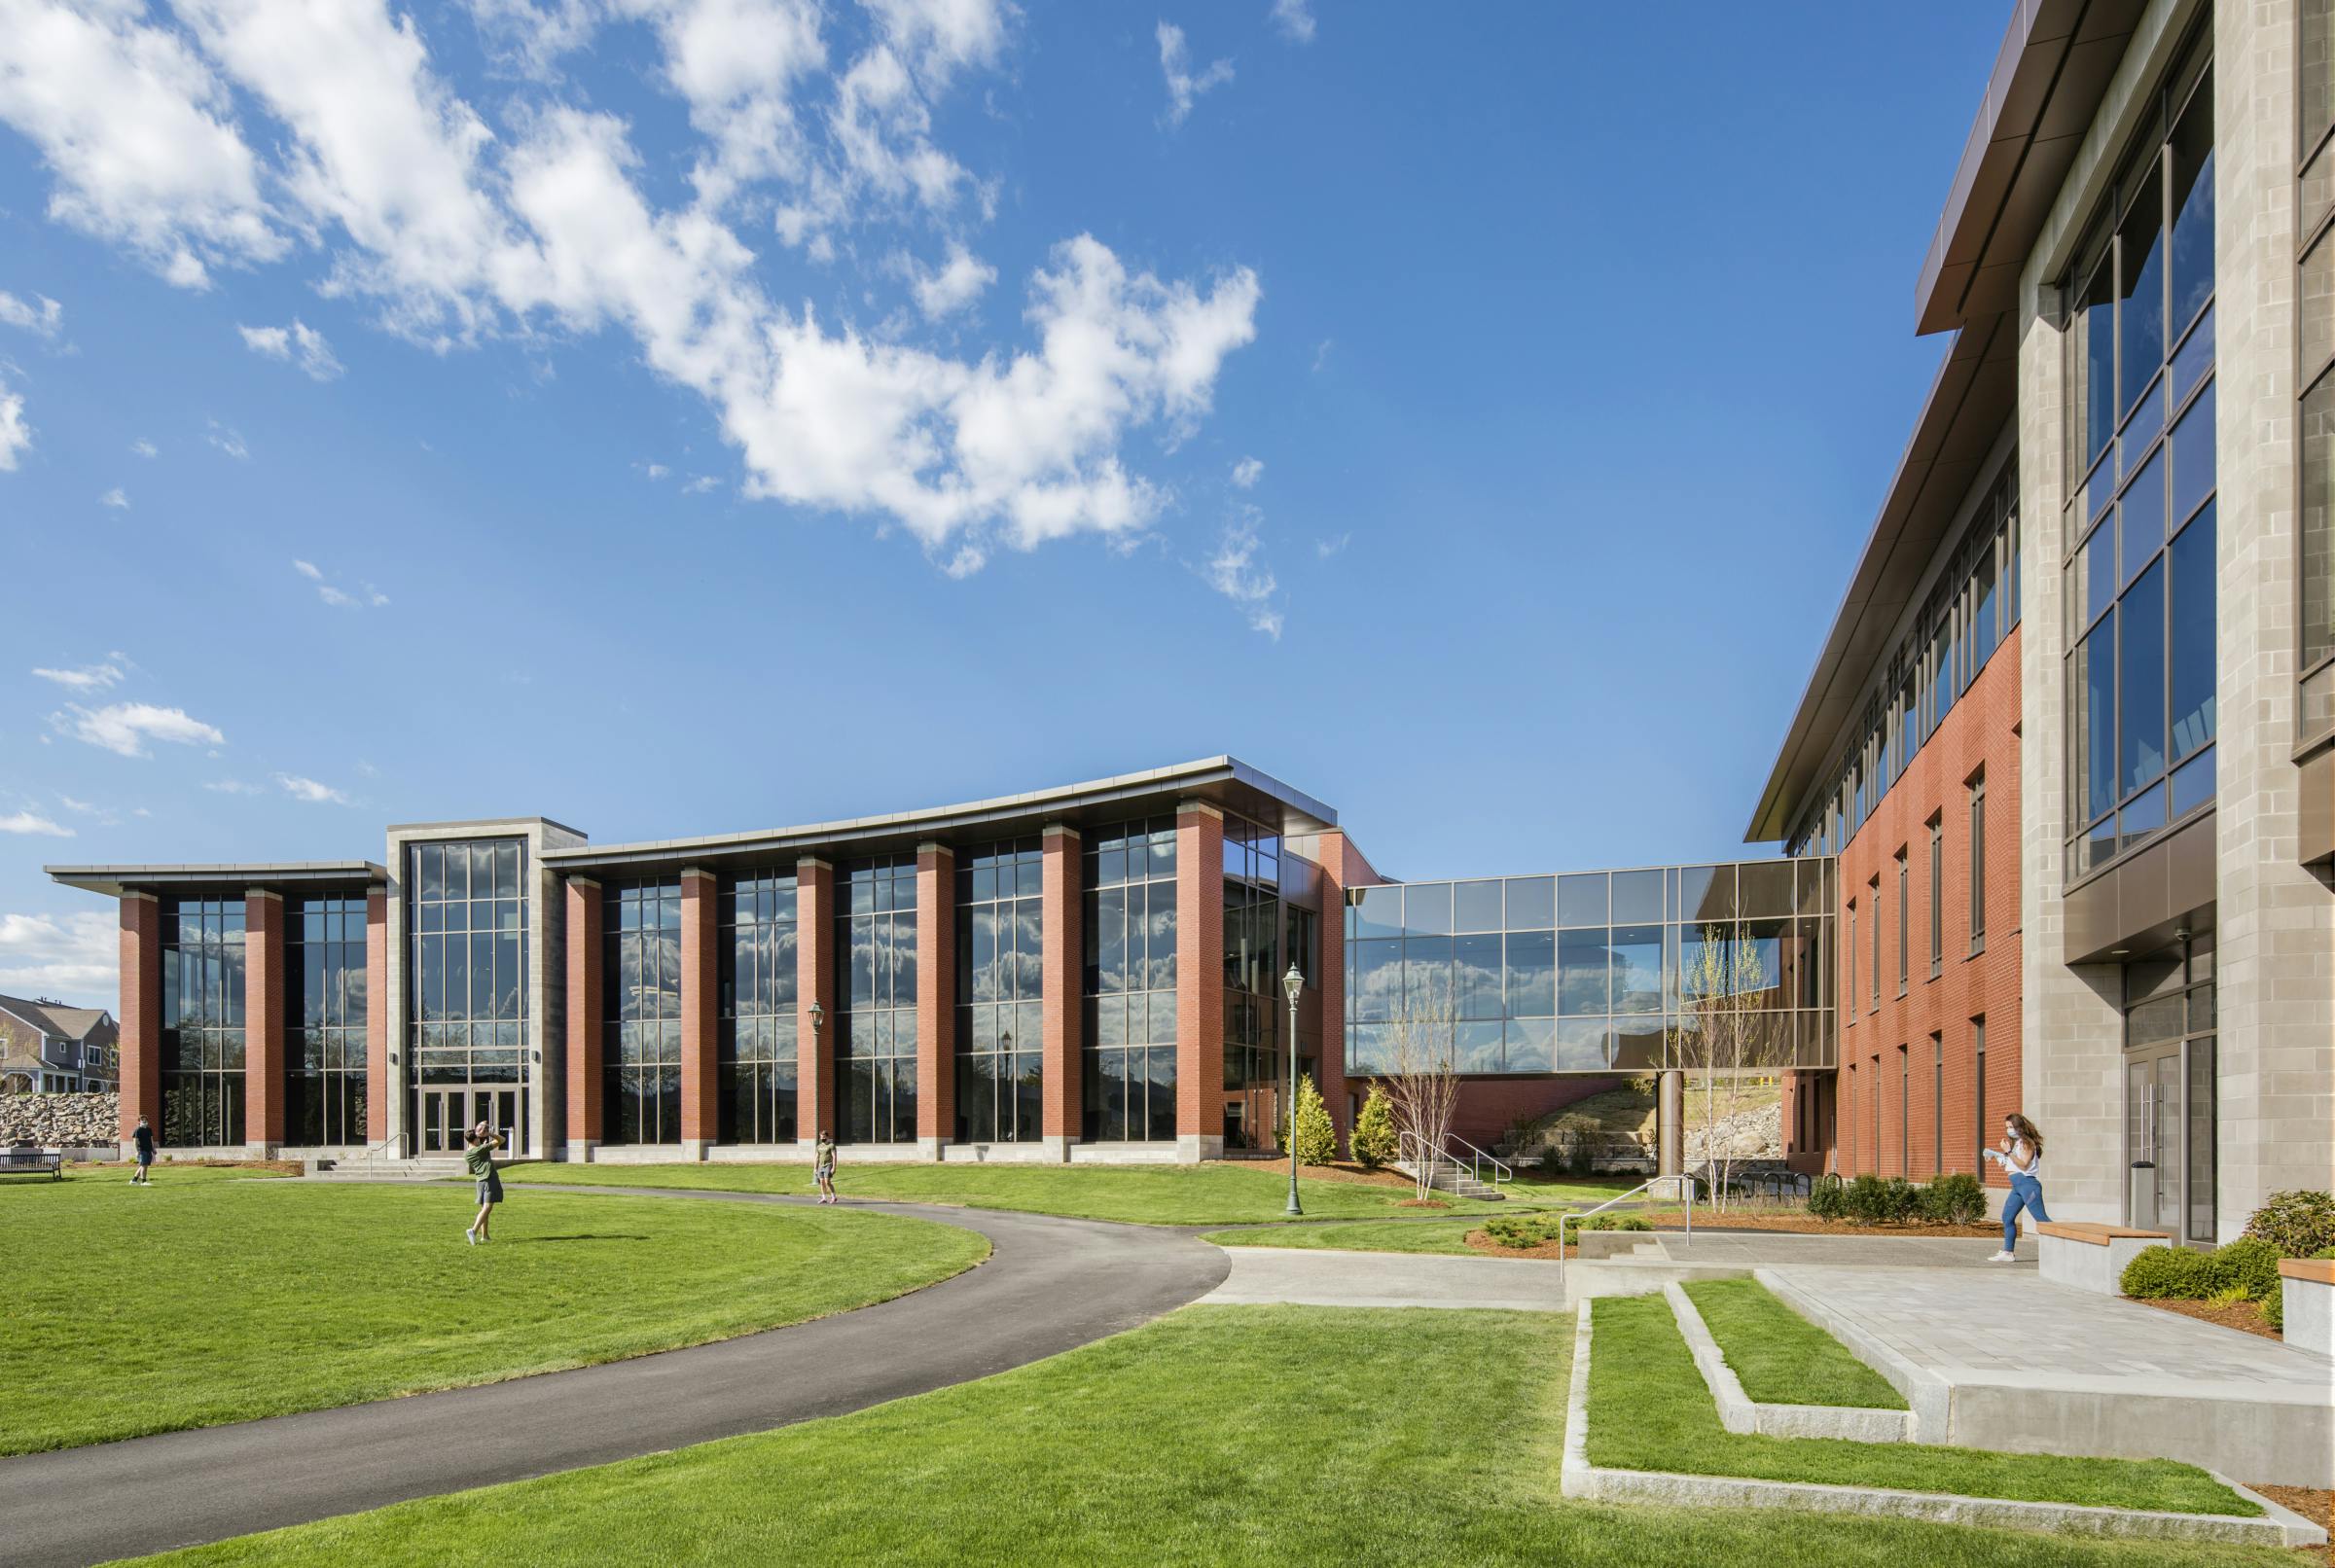 Endicott College's Samuel C. Wax Academic Center received honor by ENR New England